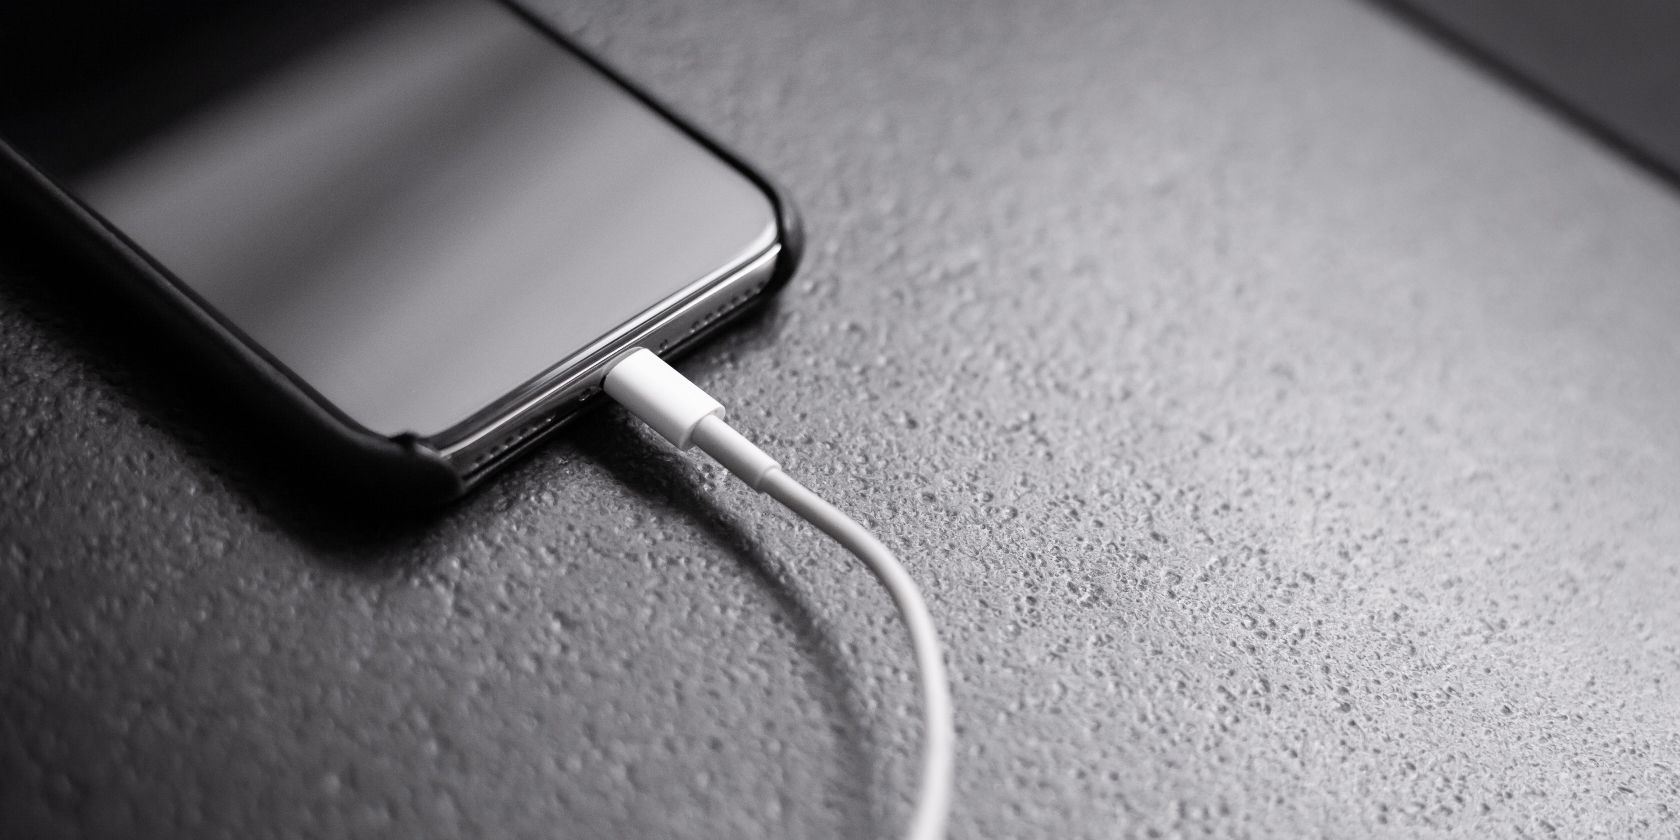 Why Doesn't Apple Want the iPhone to Have a USB-C Port?